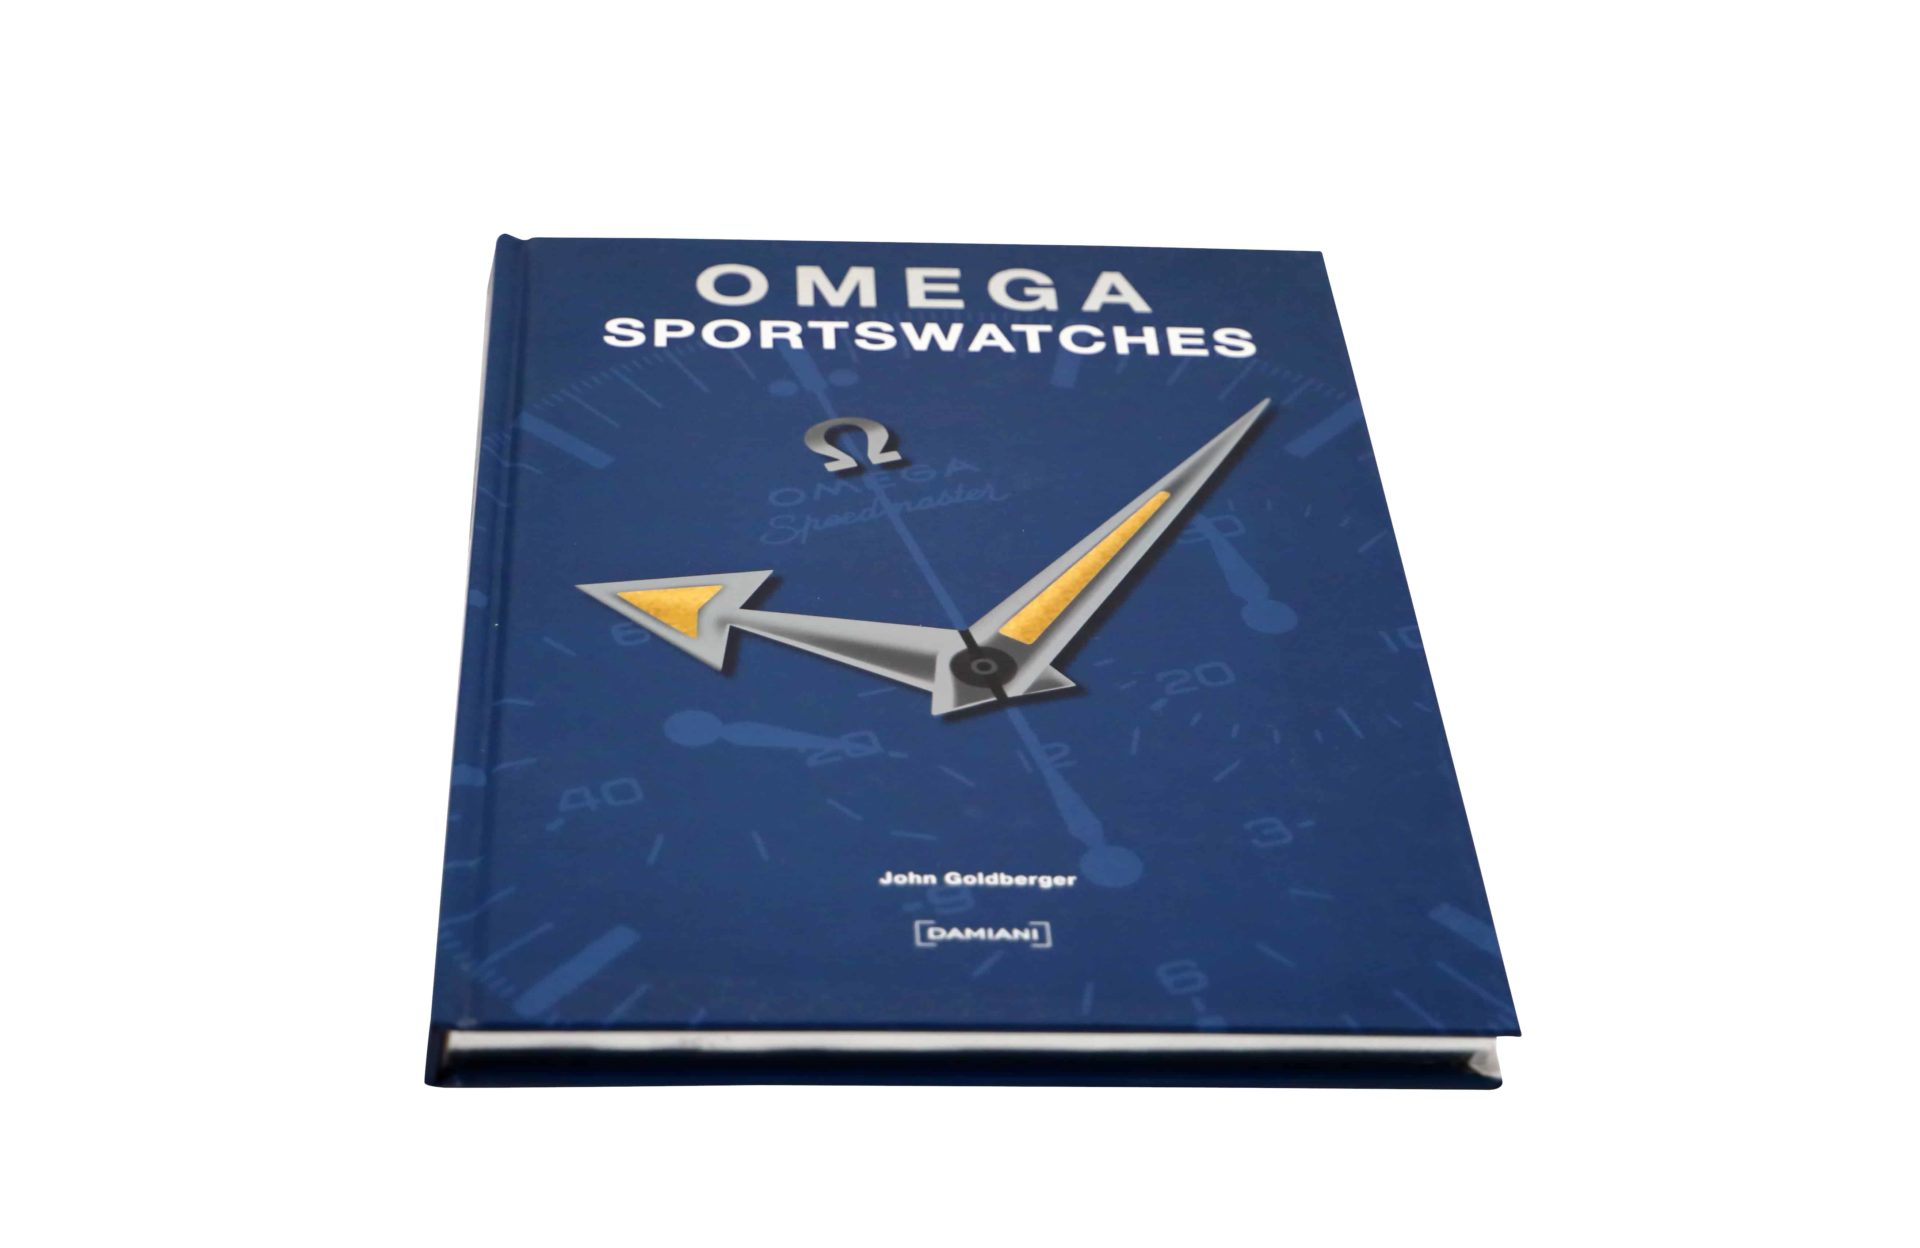 Omega Sportswatches Book By John Goldberger - Rare Watch Parts